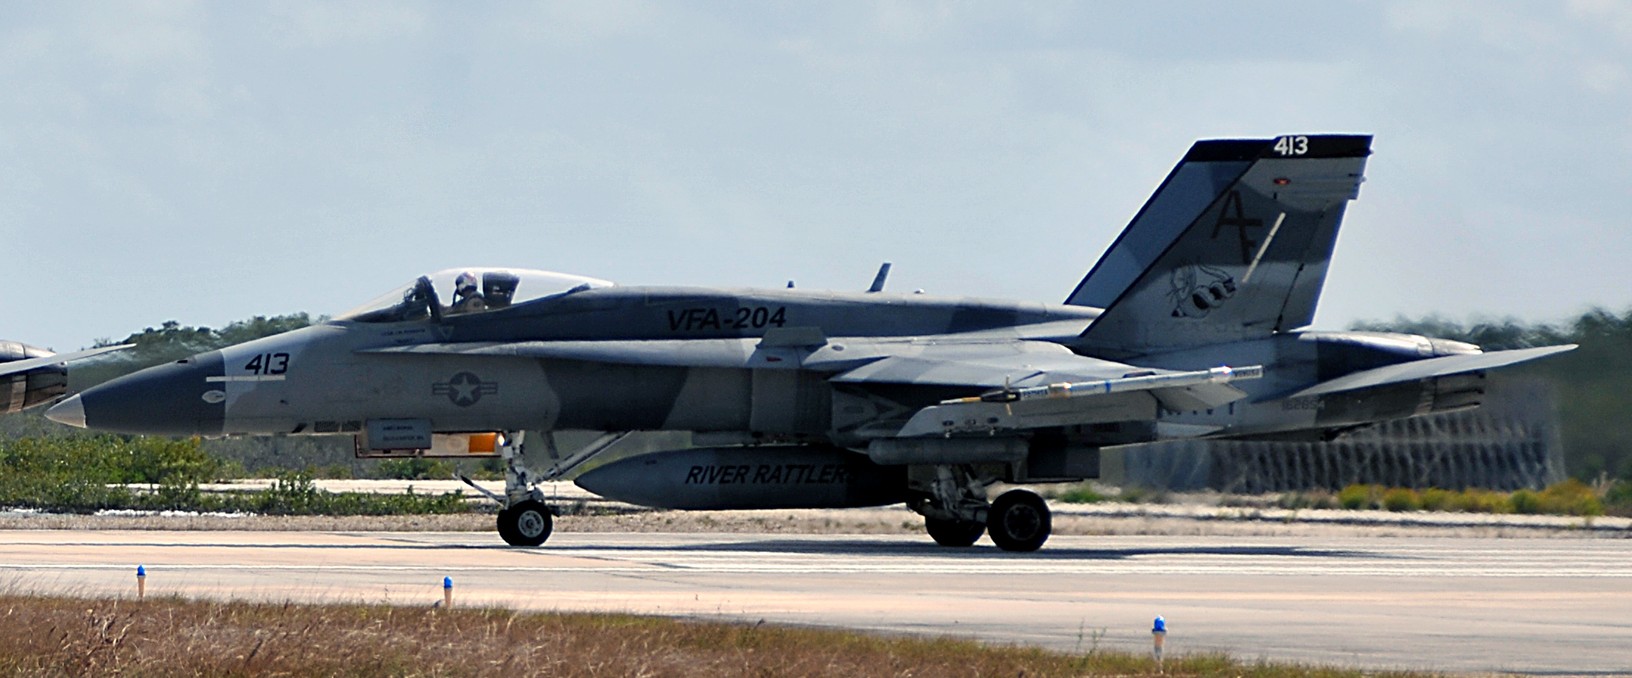 vfa-204 river rattlers f/a-18a+ hornet strike fighter squadron us navy reserve 25